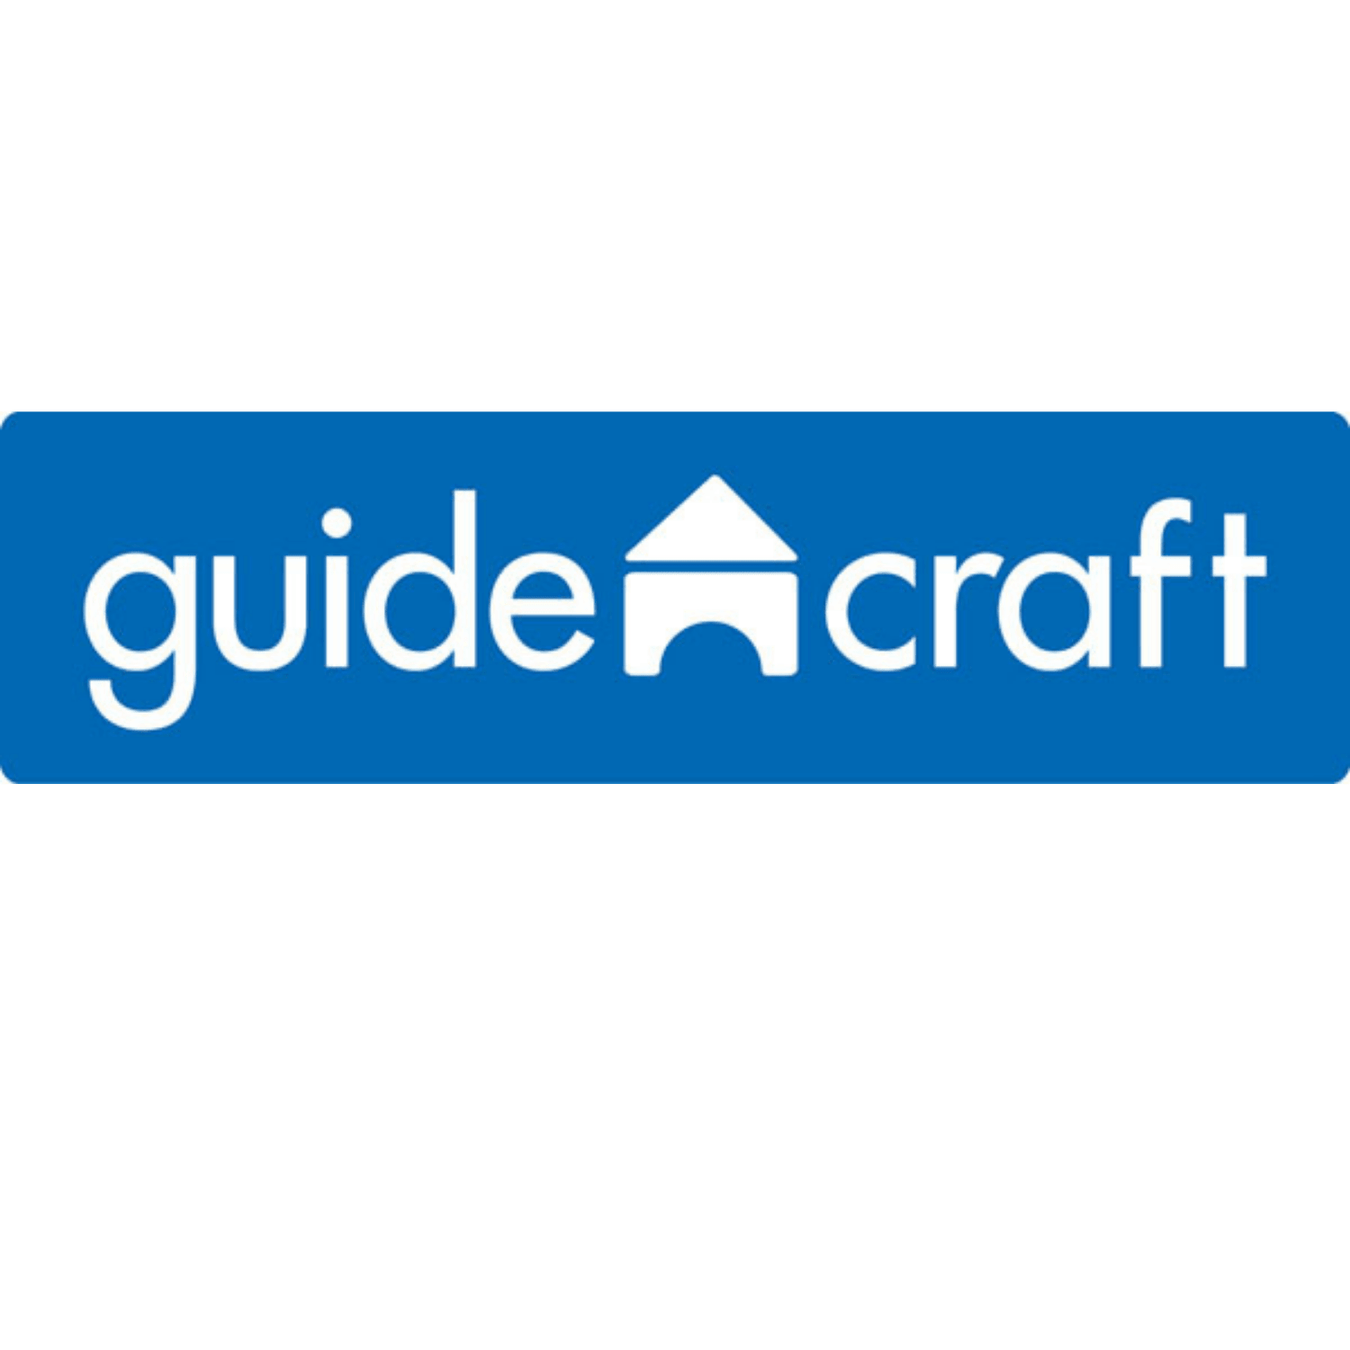 Featured / Open Ended - Guidecraft Wooden Toys USA - My Playroom 